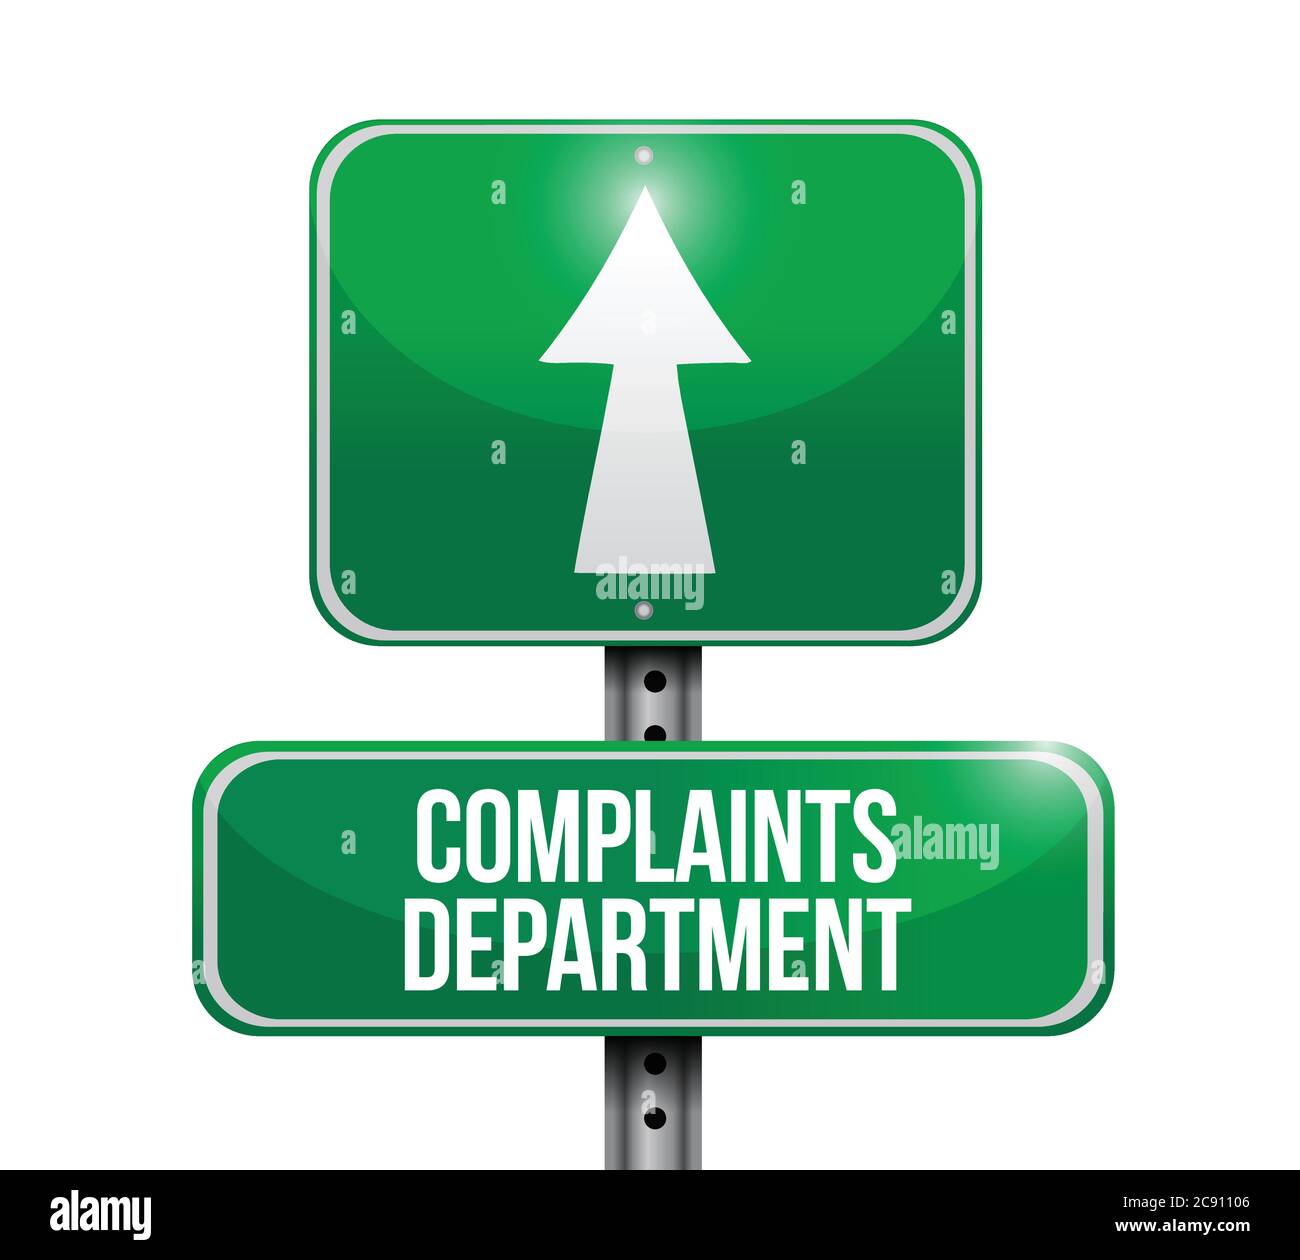 Complaints department road sign illustration design over a white background Stock Vector